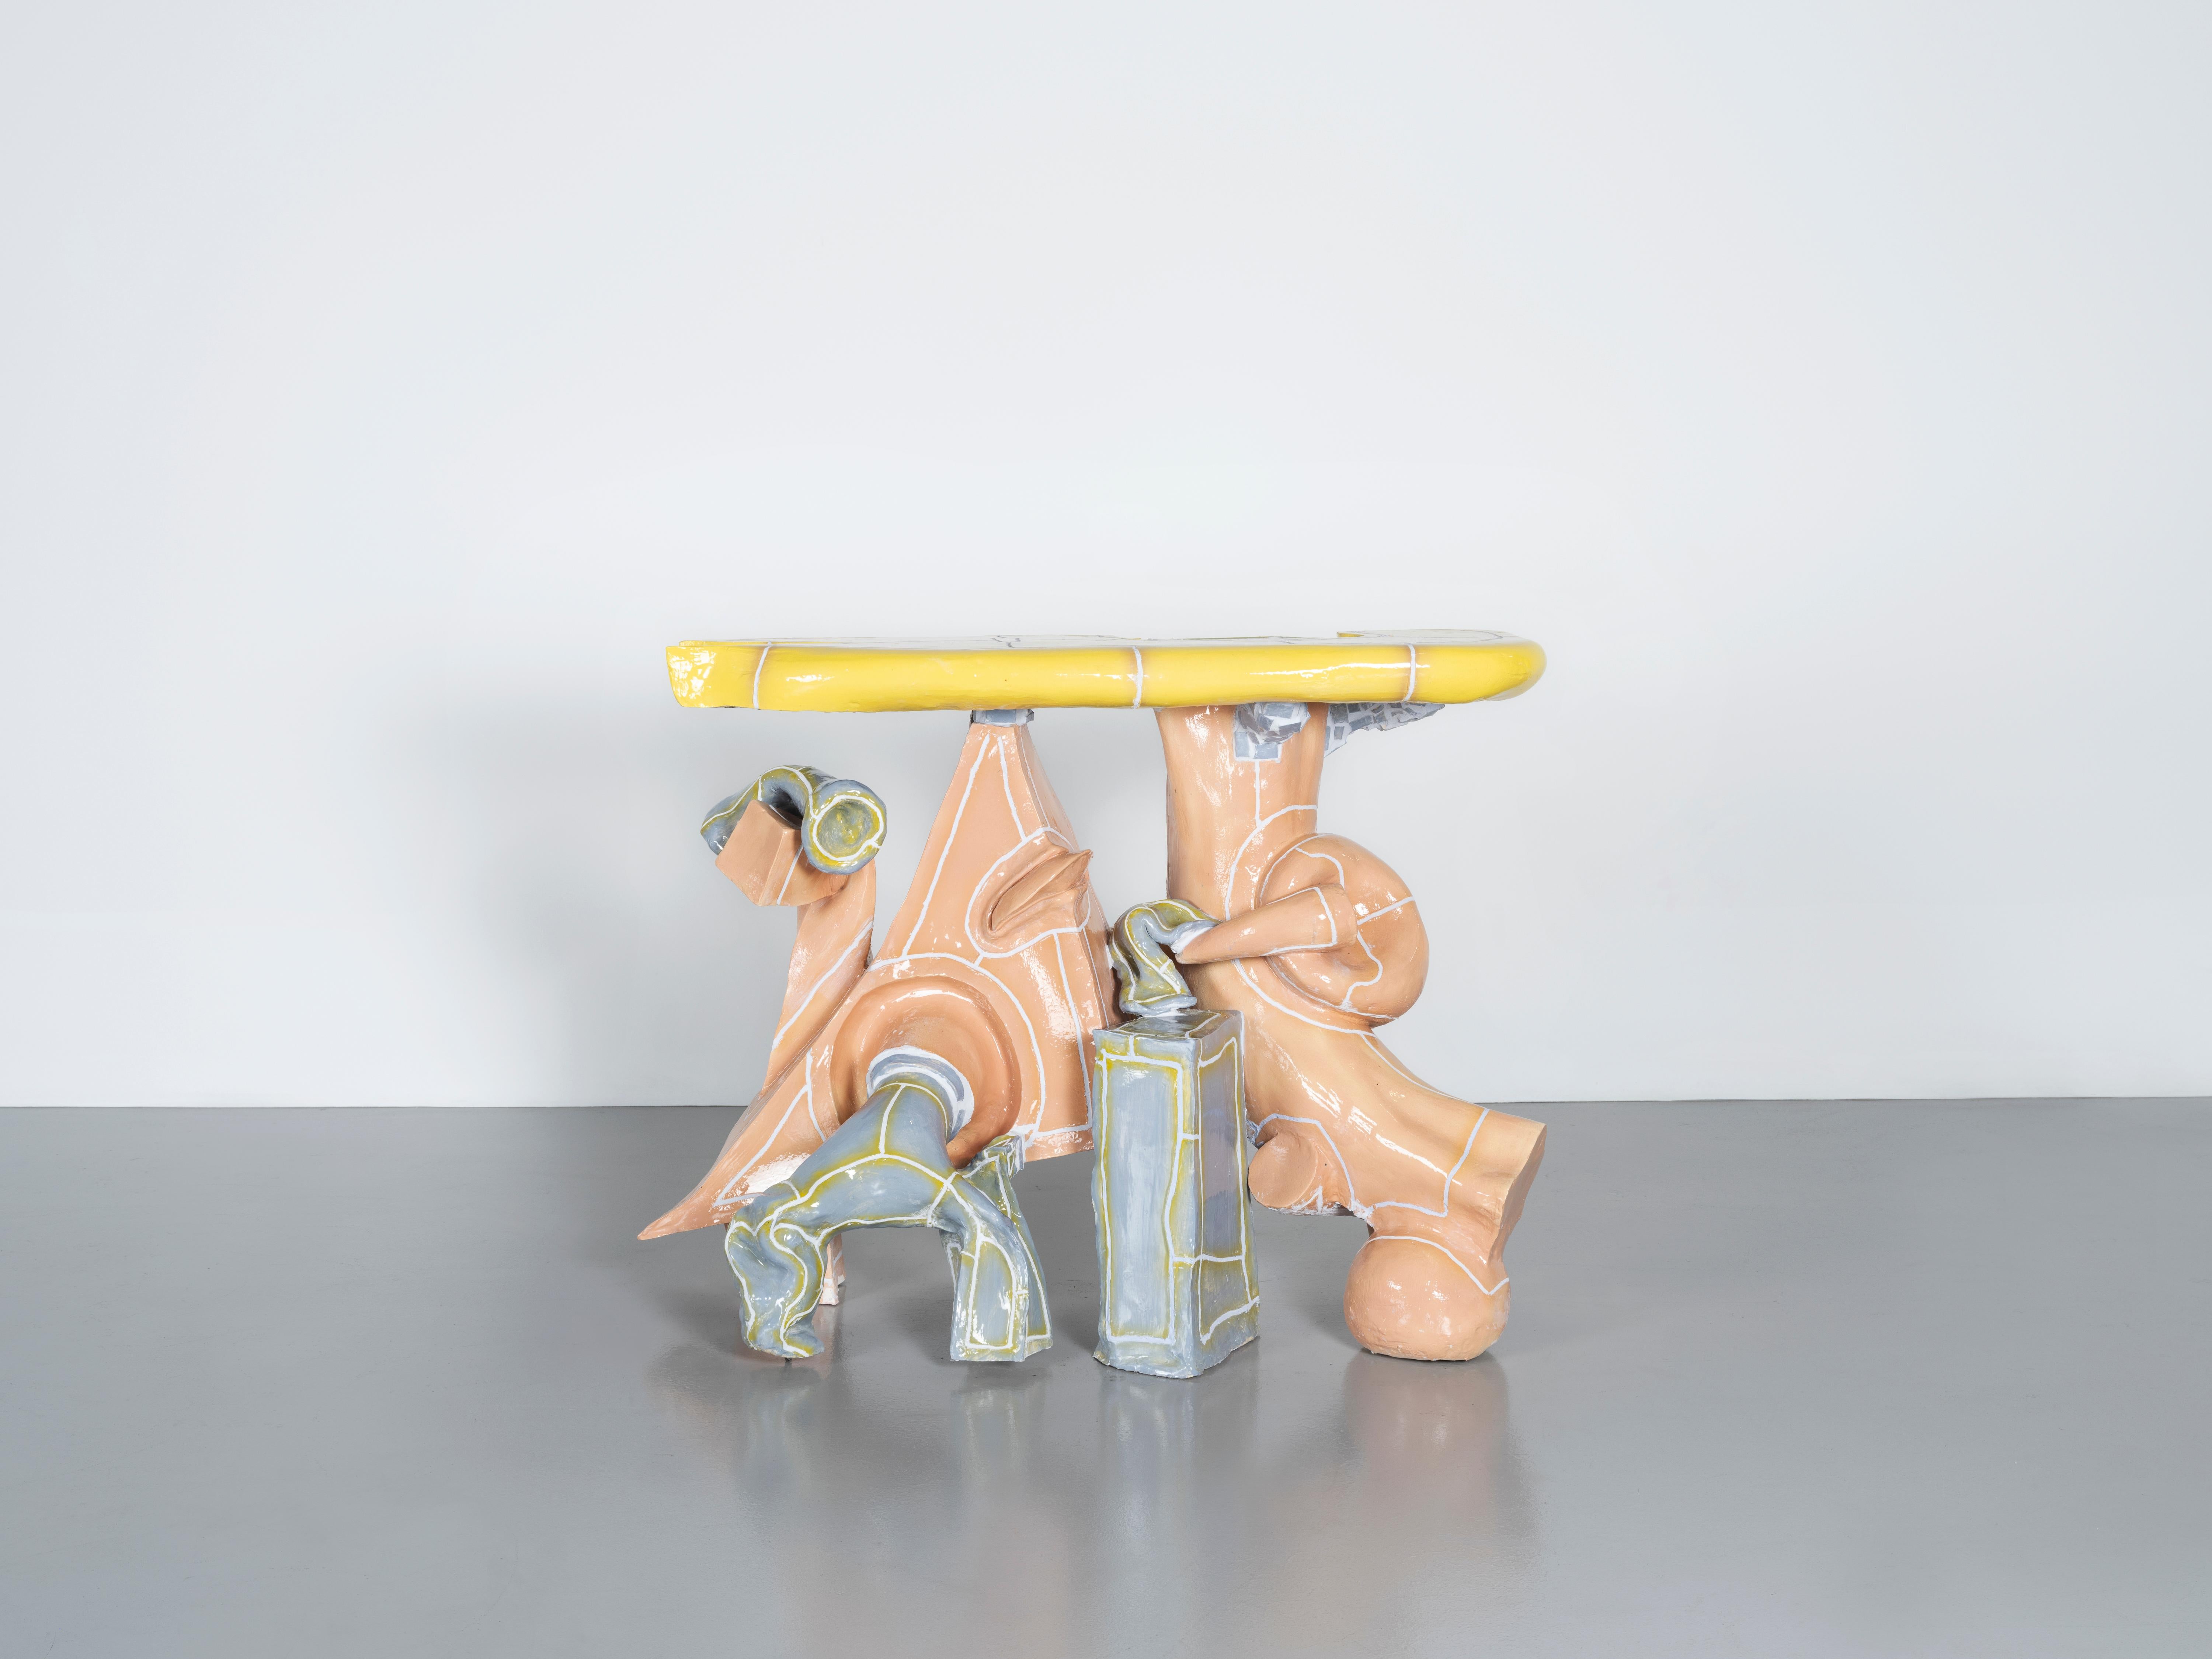 Misha Kahn [American, b. 1989]
A Little of This and a Little of That, 2022
Ceramic
Measures: 36 x 48 x 20.25 inches
91 x 122 x 51 cm

Misha Kahn has emerged as one of the leading creative voices of his generation. Through a wildly imaginative